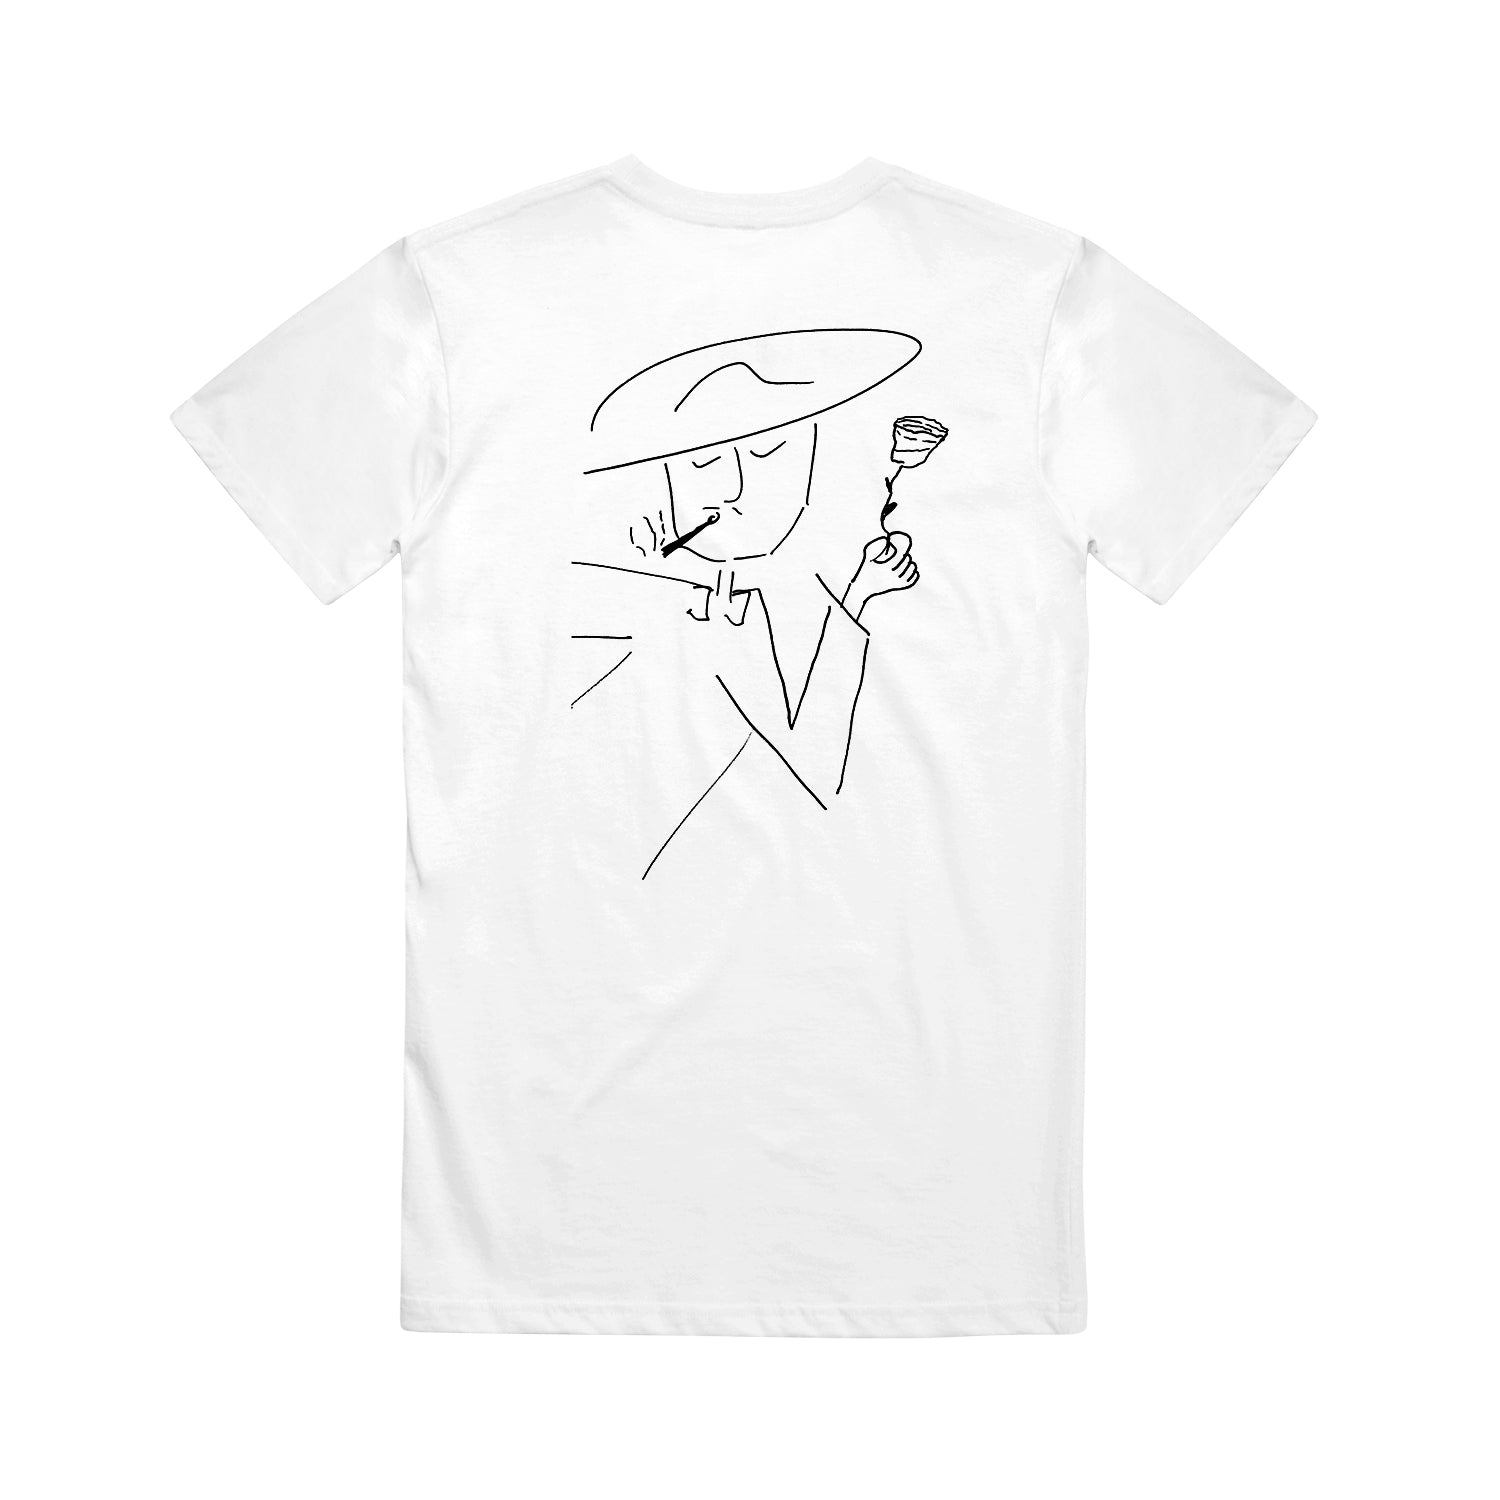 image of the back of a white tee shirt on a white background. tee has an outline sketch of a person in a hat, smoking holding a rose